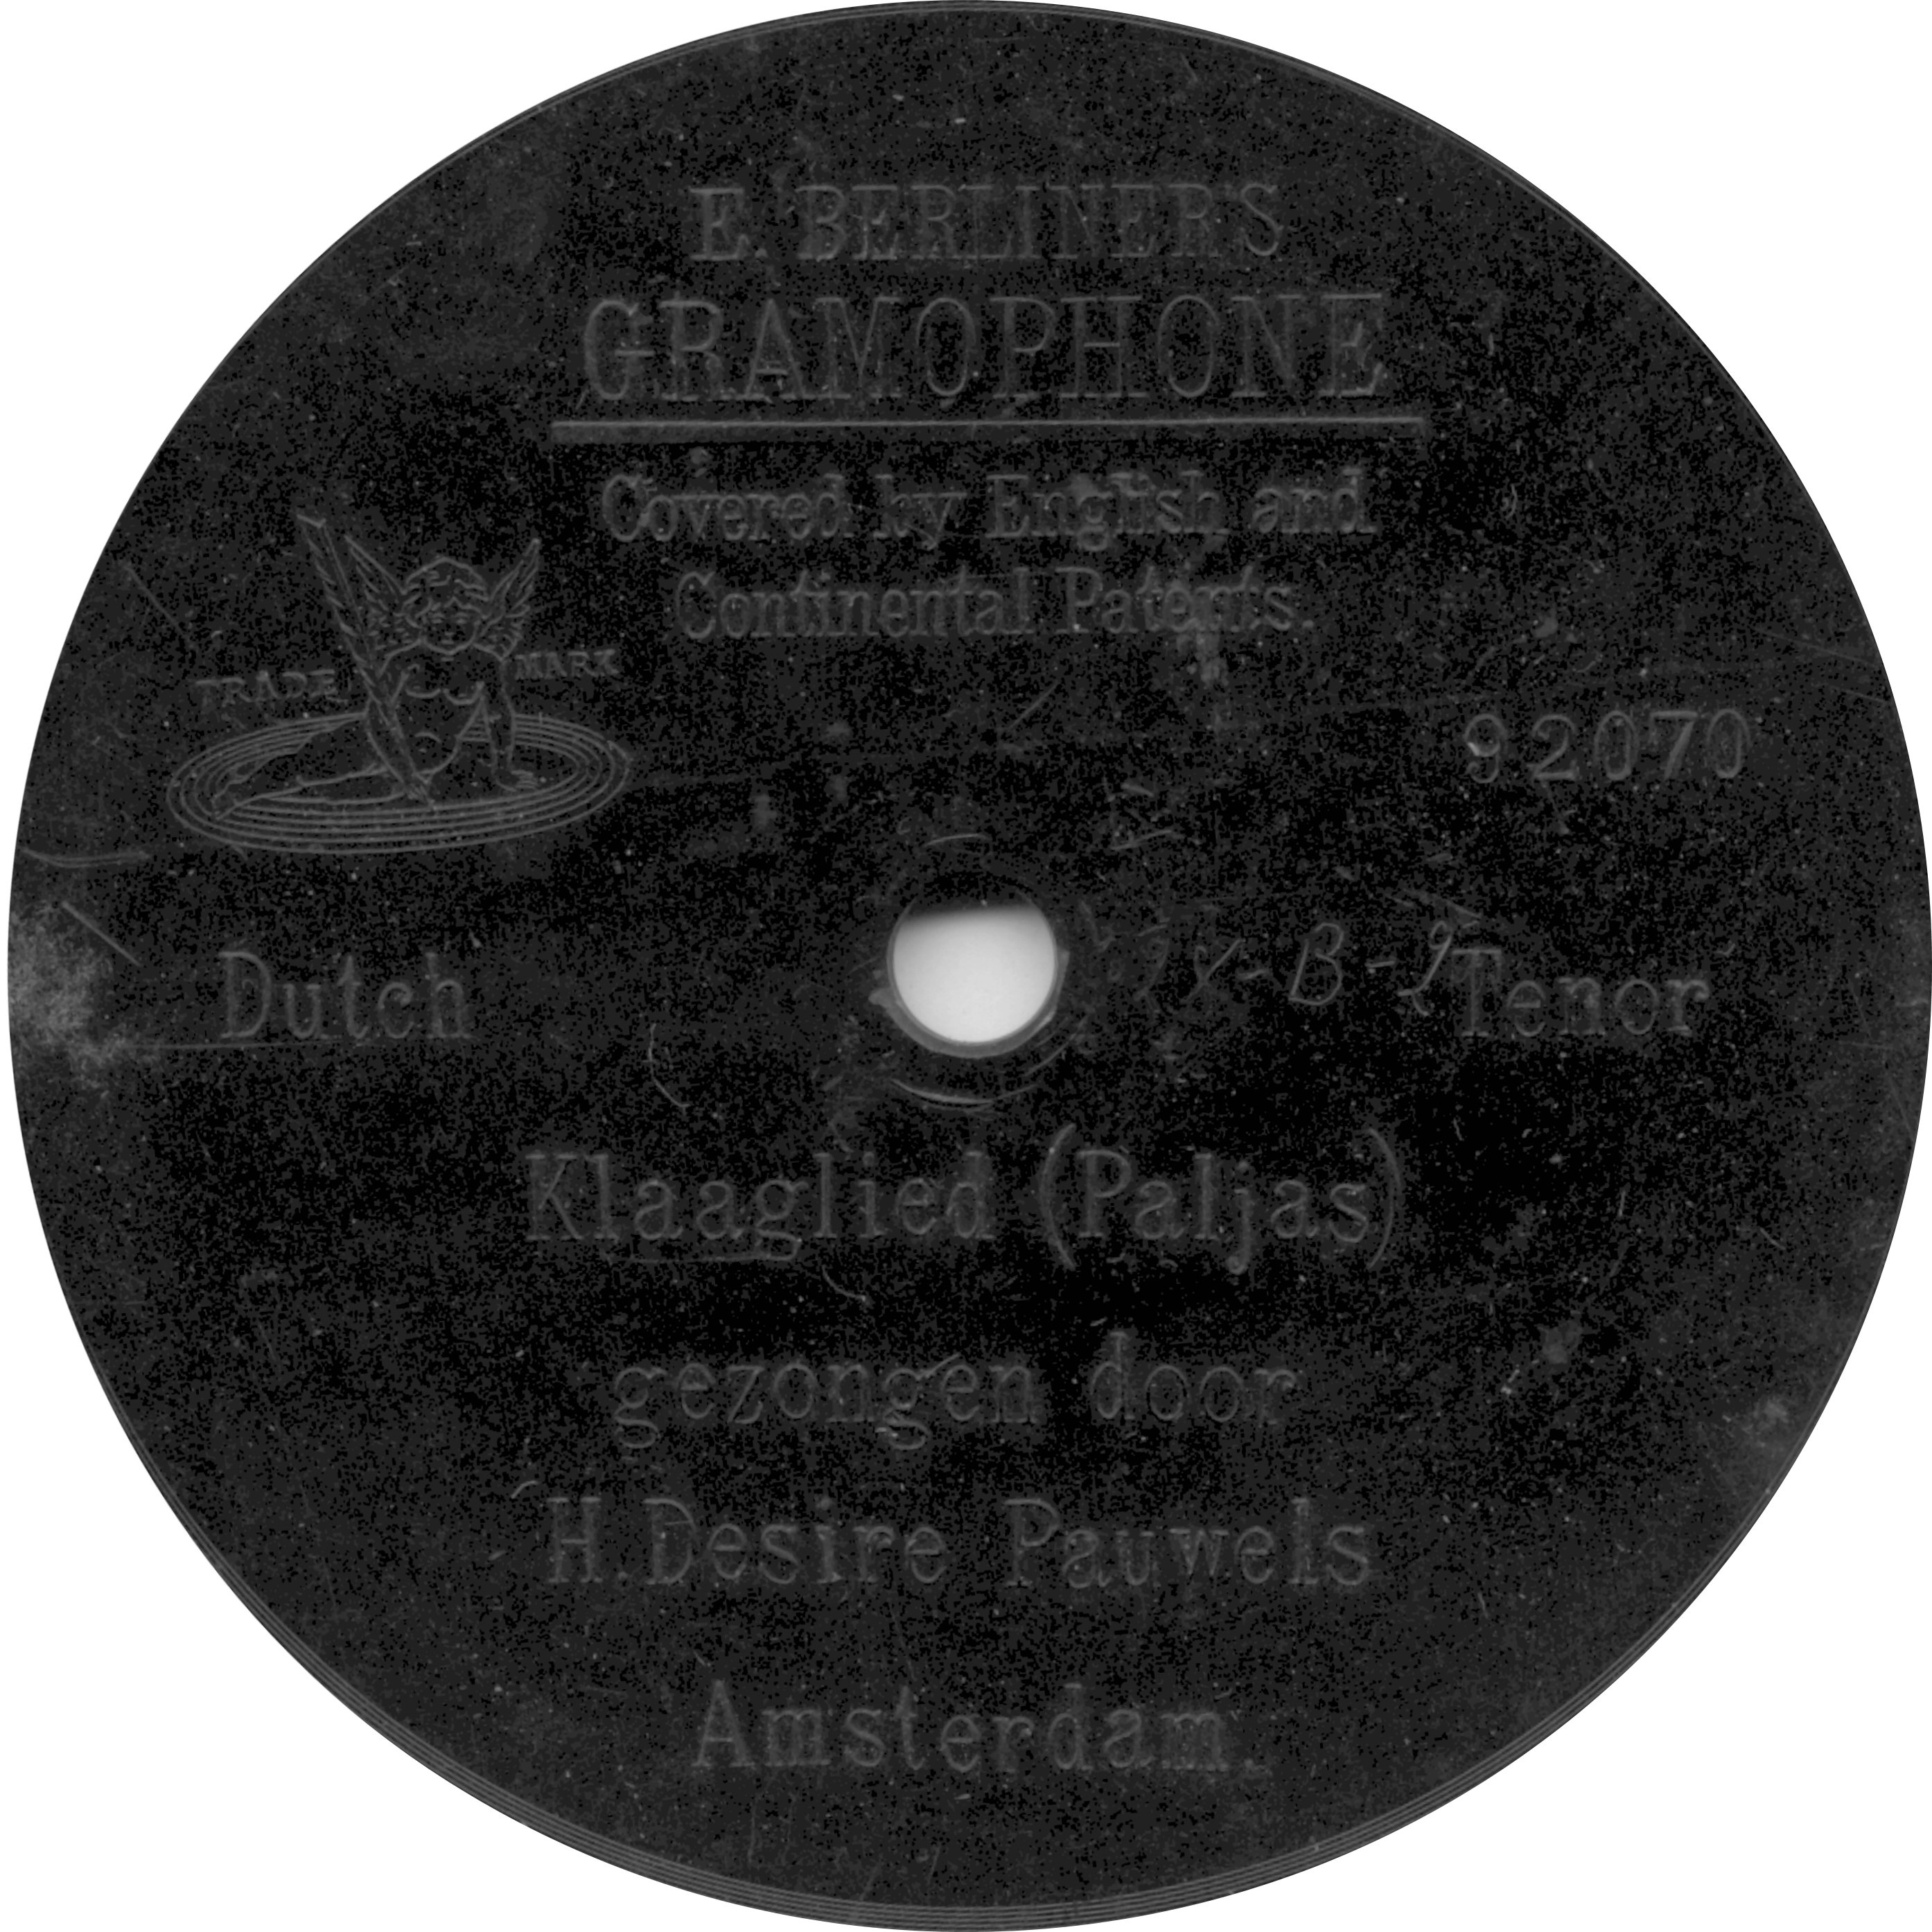 Picture of Pauwels's label